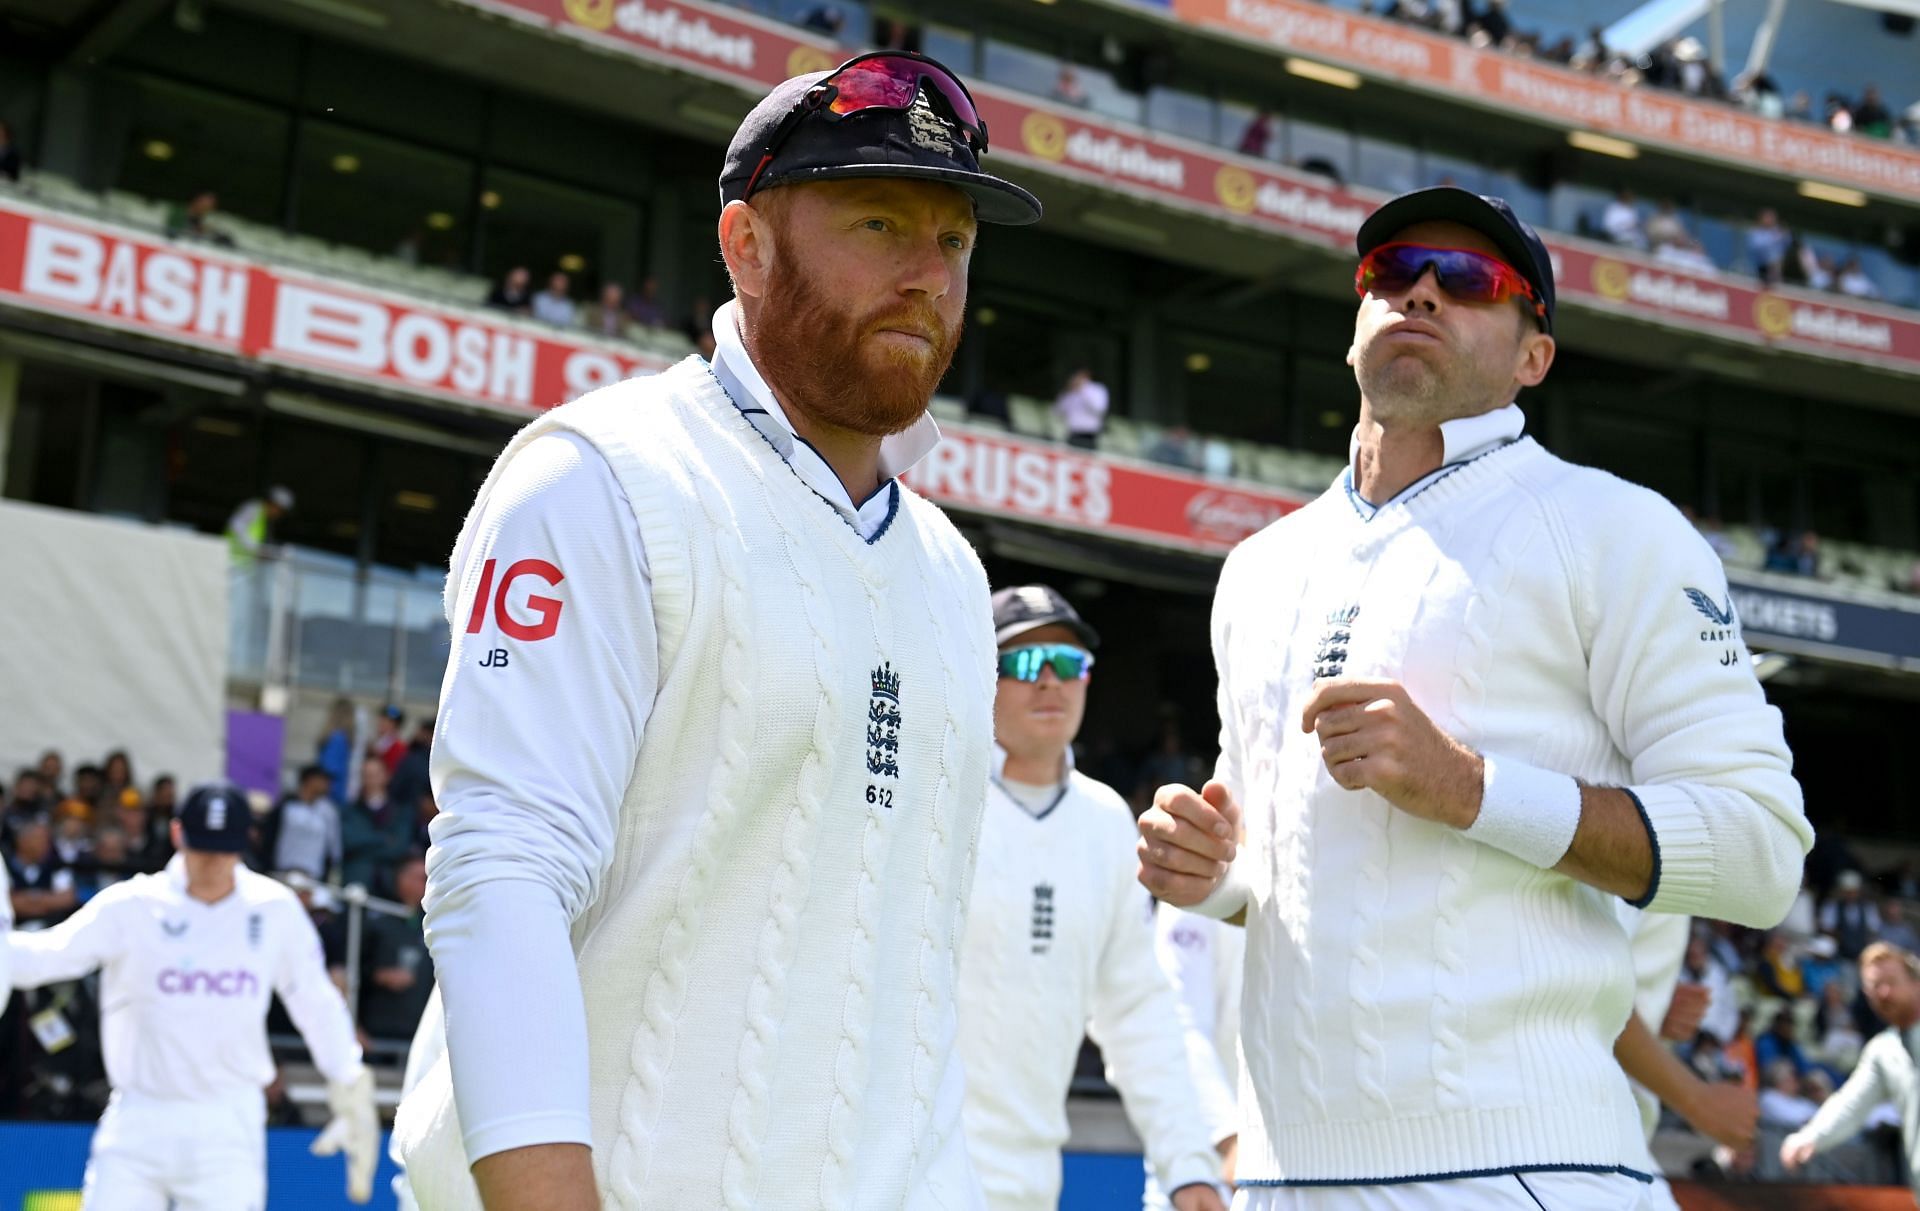 Jonny Bairstow and James Anderson. (Credits: Getty)